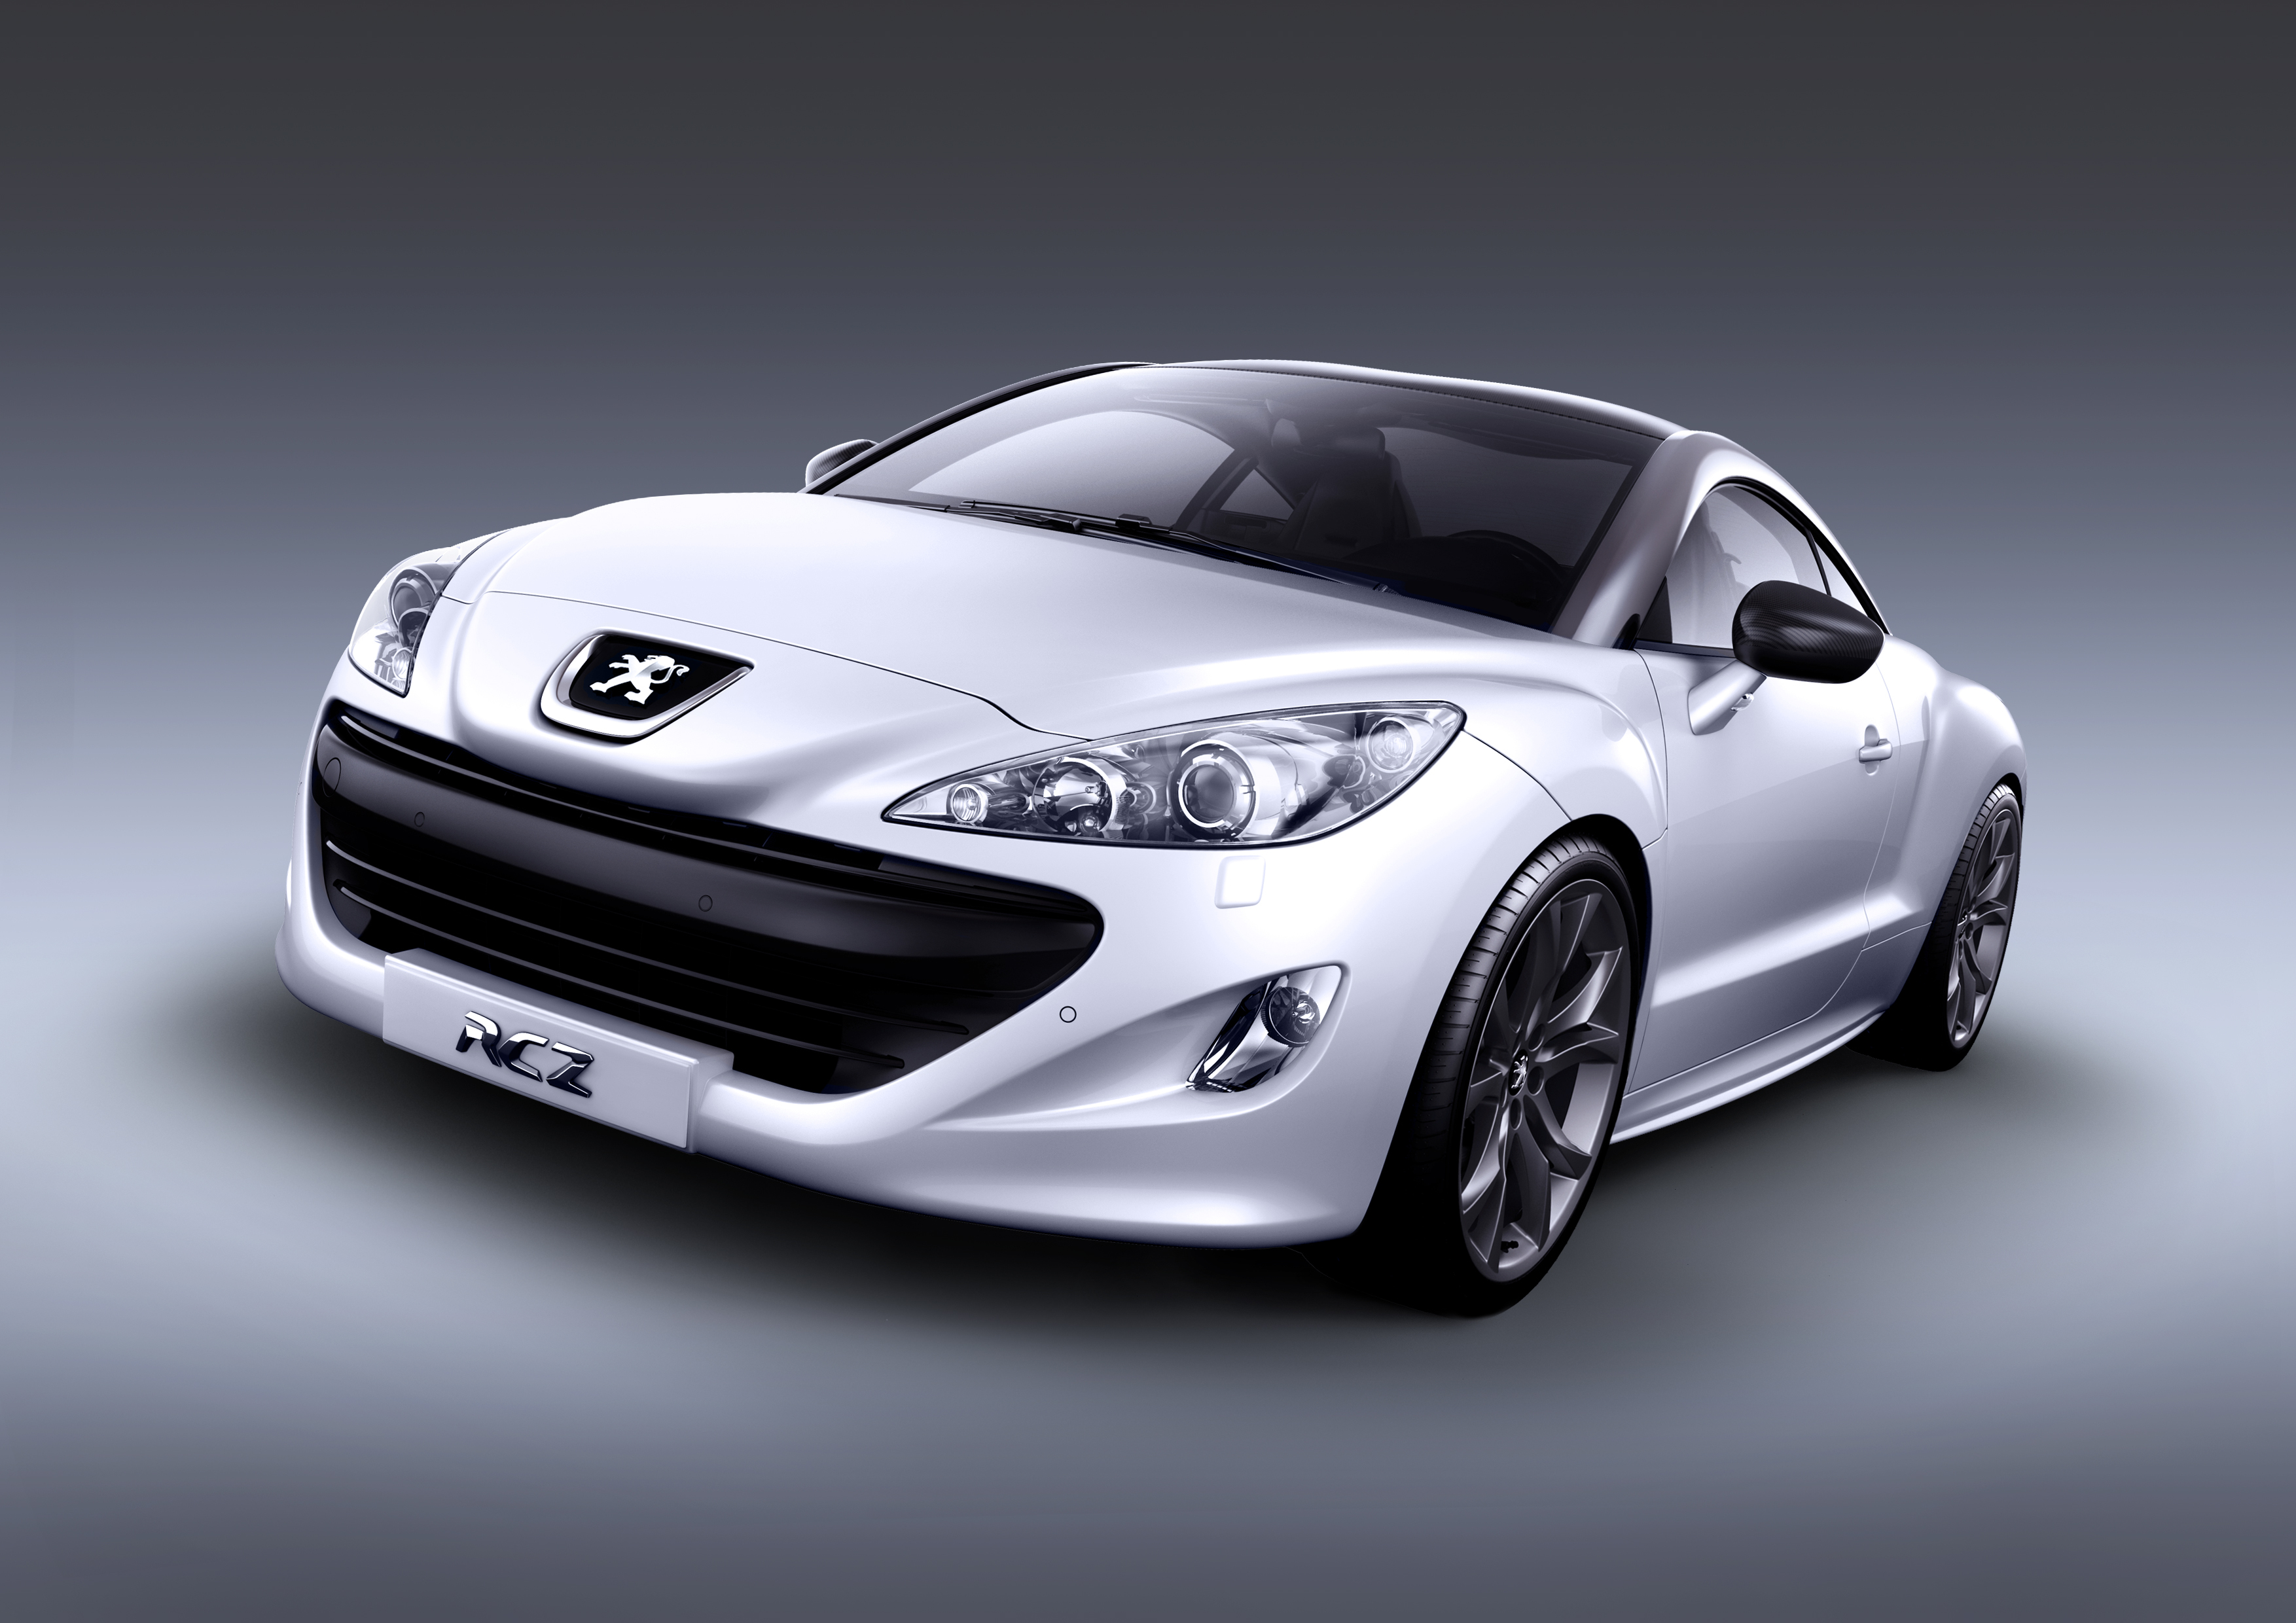 56762 download wallpaper sports, peugeot, cars, front view, sports car, coupe, compartment, rcz screensavers and pictures for free